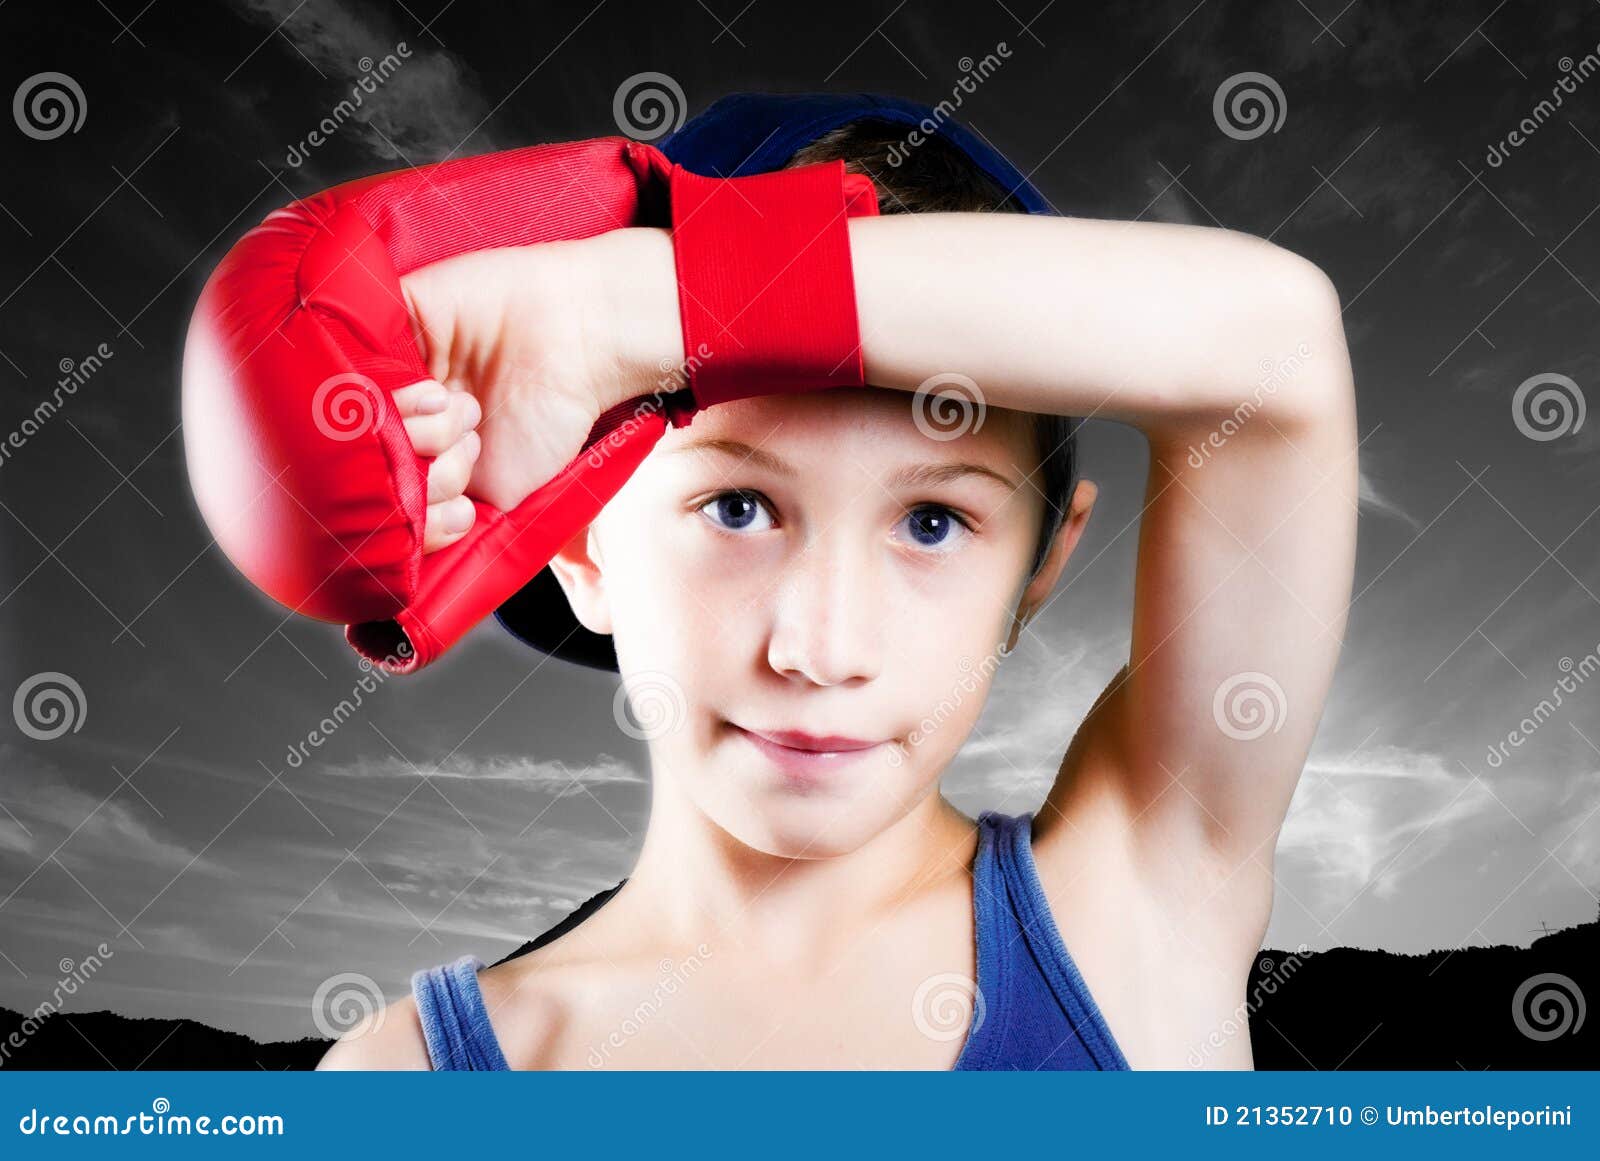 Child with boxing glove stock photo. Image of child, growth - 21352710